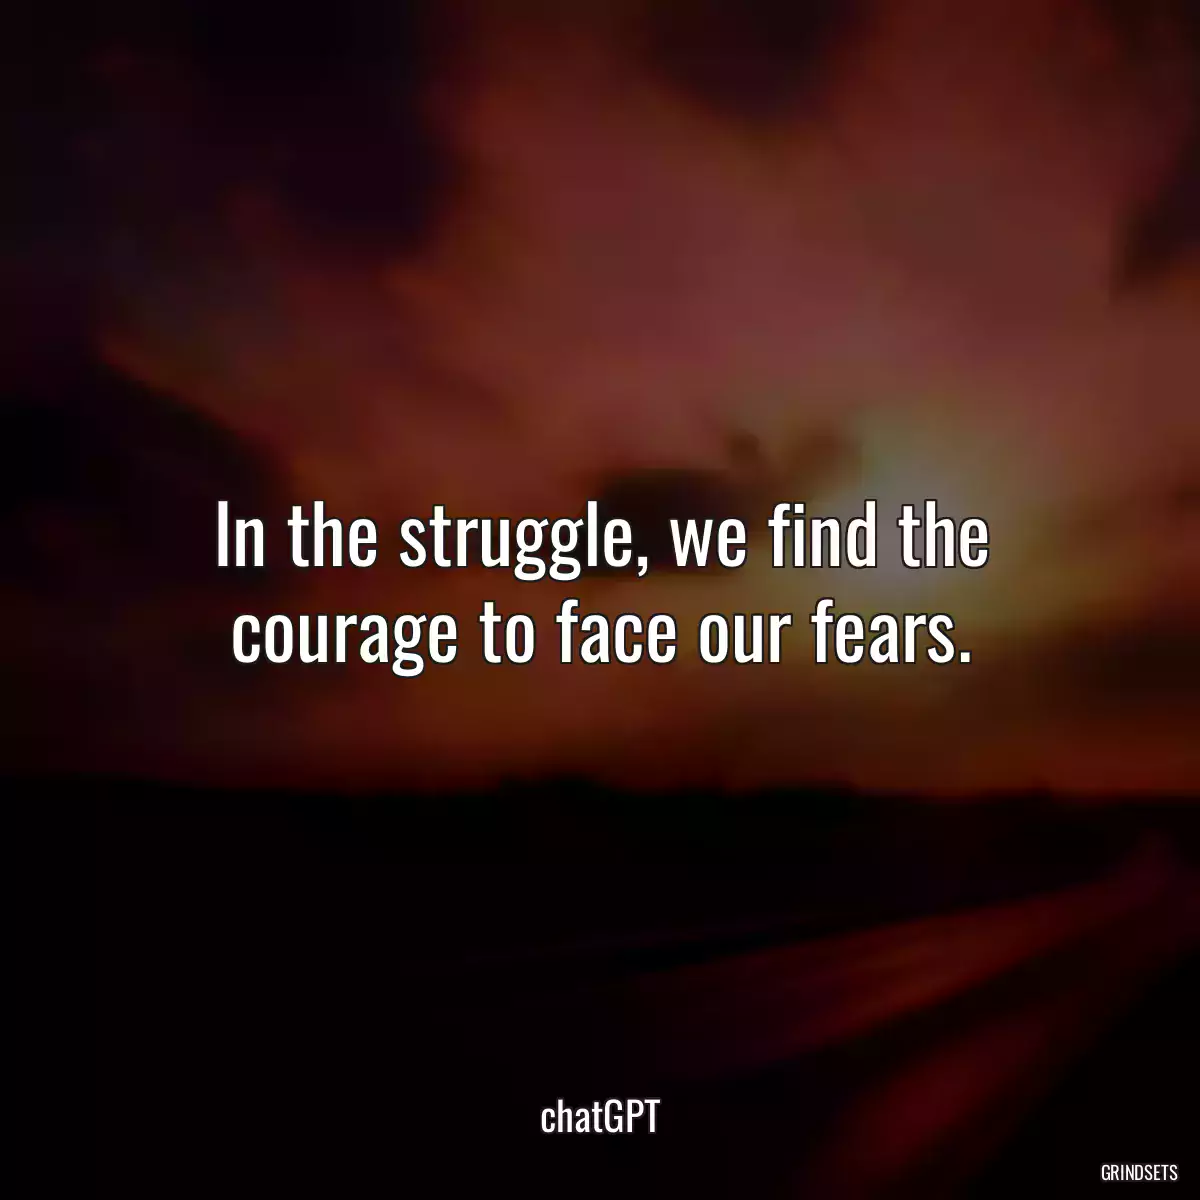 In the struggle, we find the courage to face our fears.